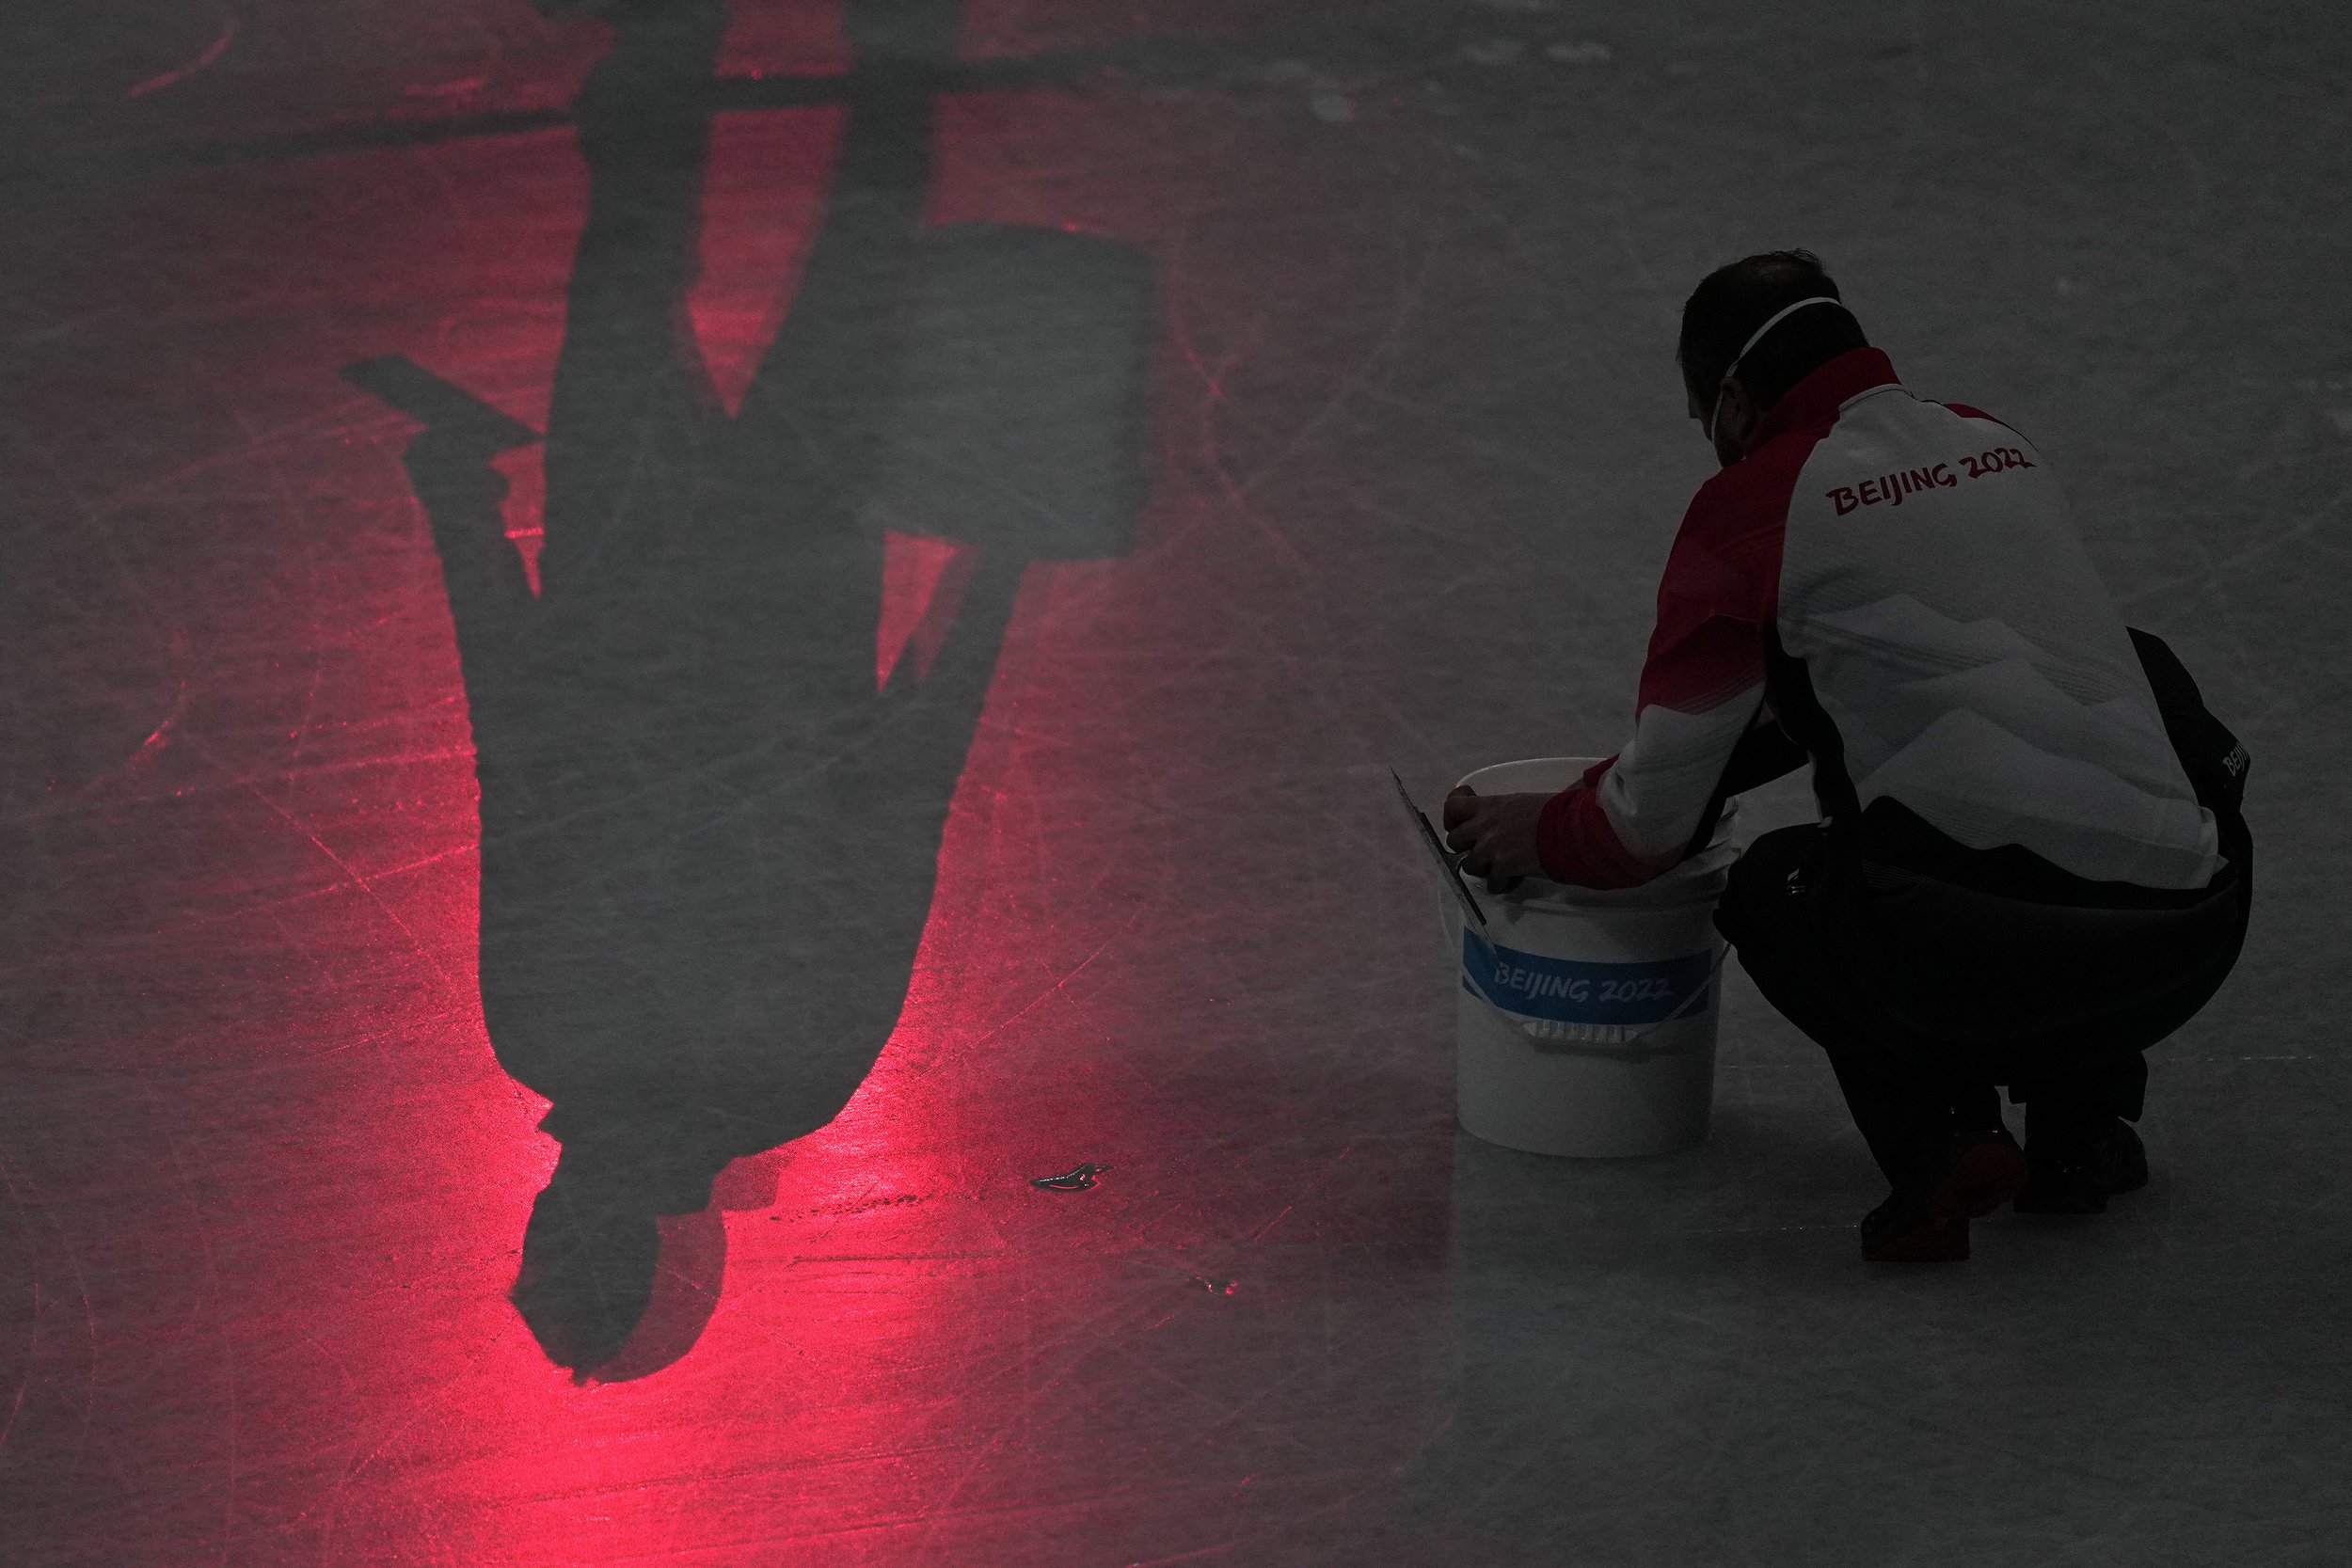  Workers repair the ice before the men's free skate program during the figure skating event at the 2022 Winter Olympics, Thursday, Feb. 10, 2022, in Beijing. (AP Photo/Jae C. Hong) 